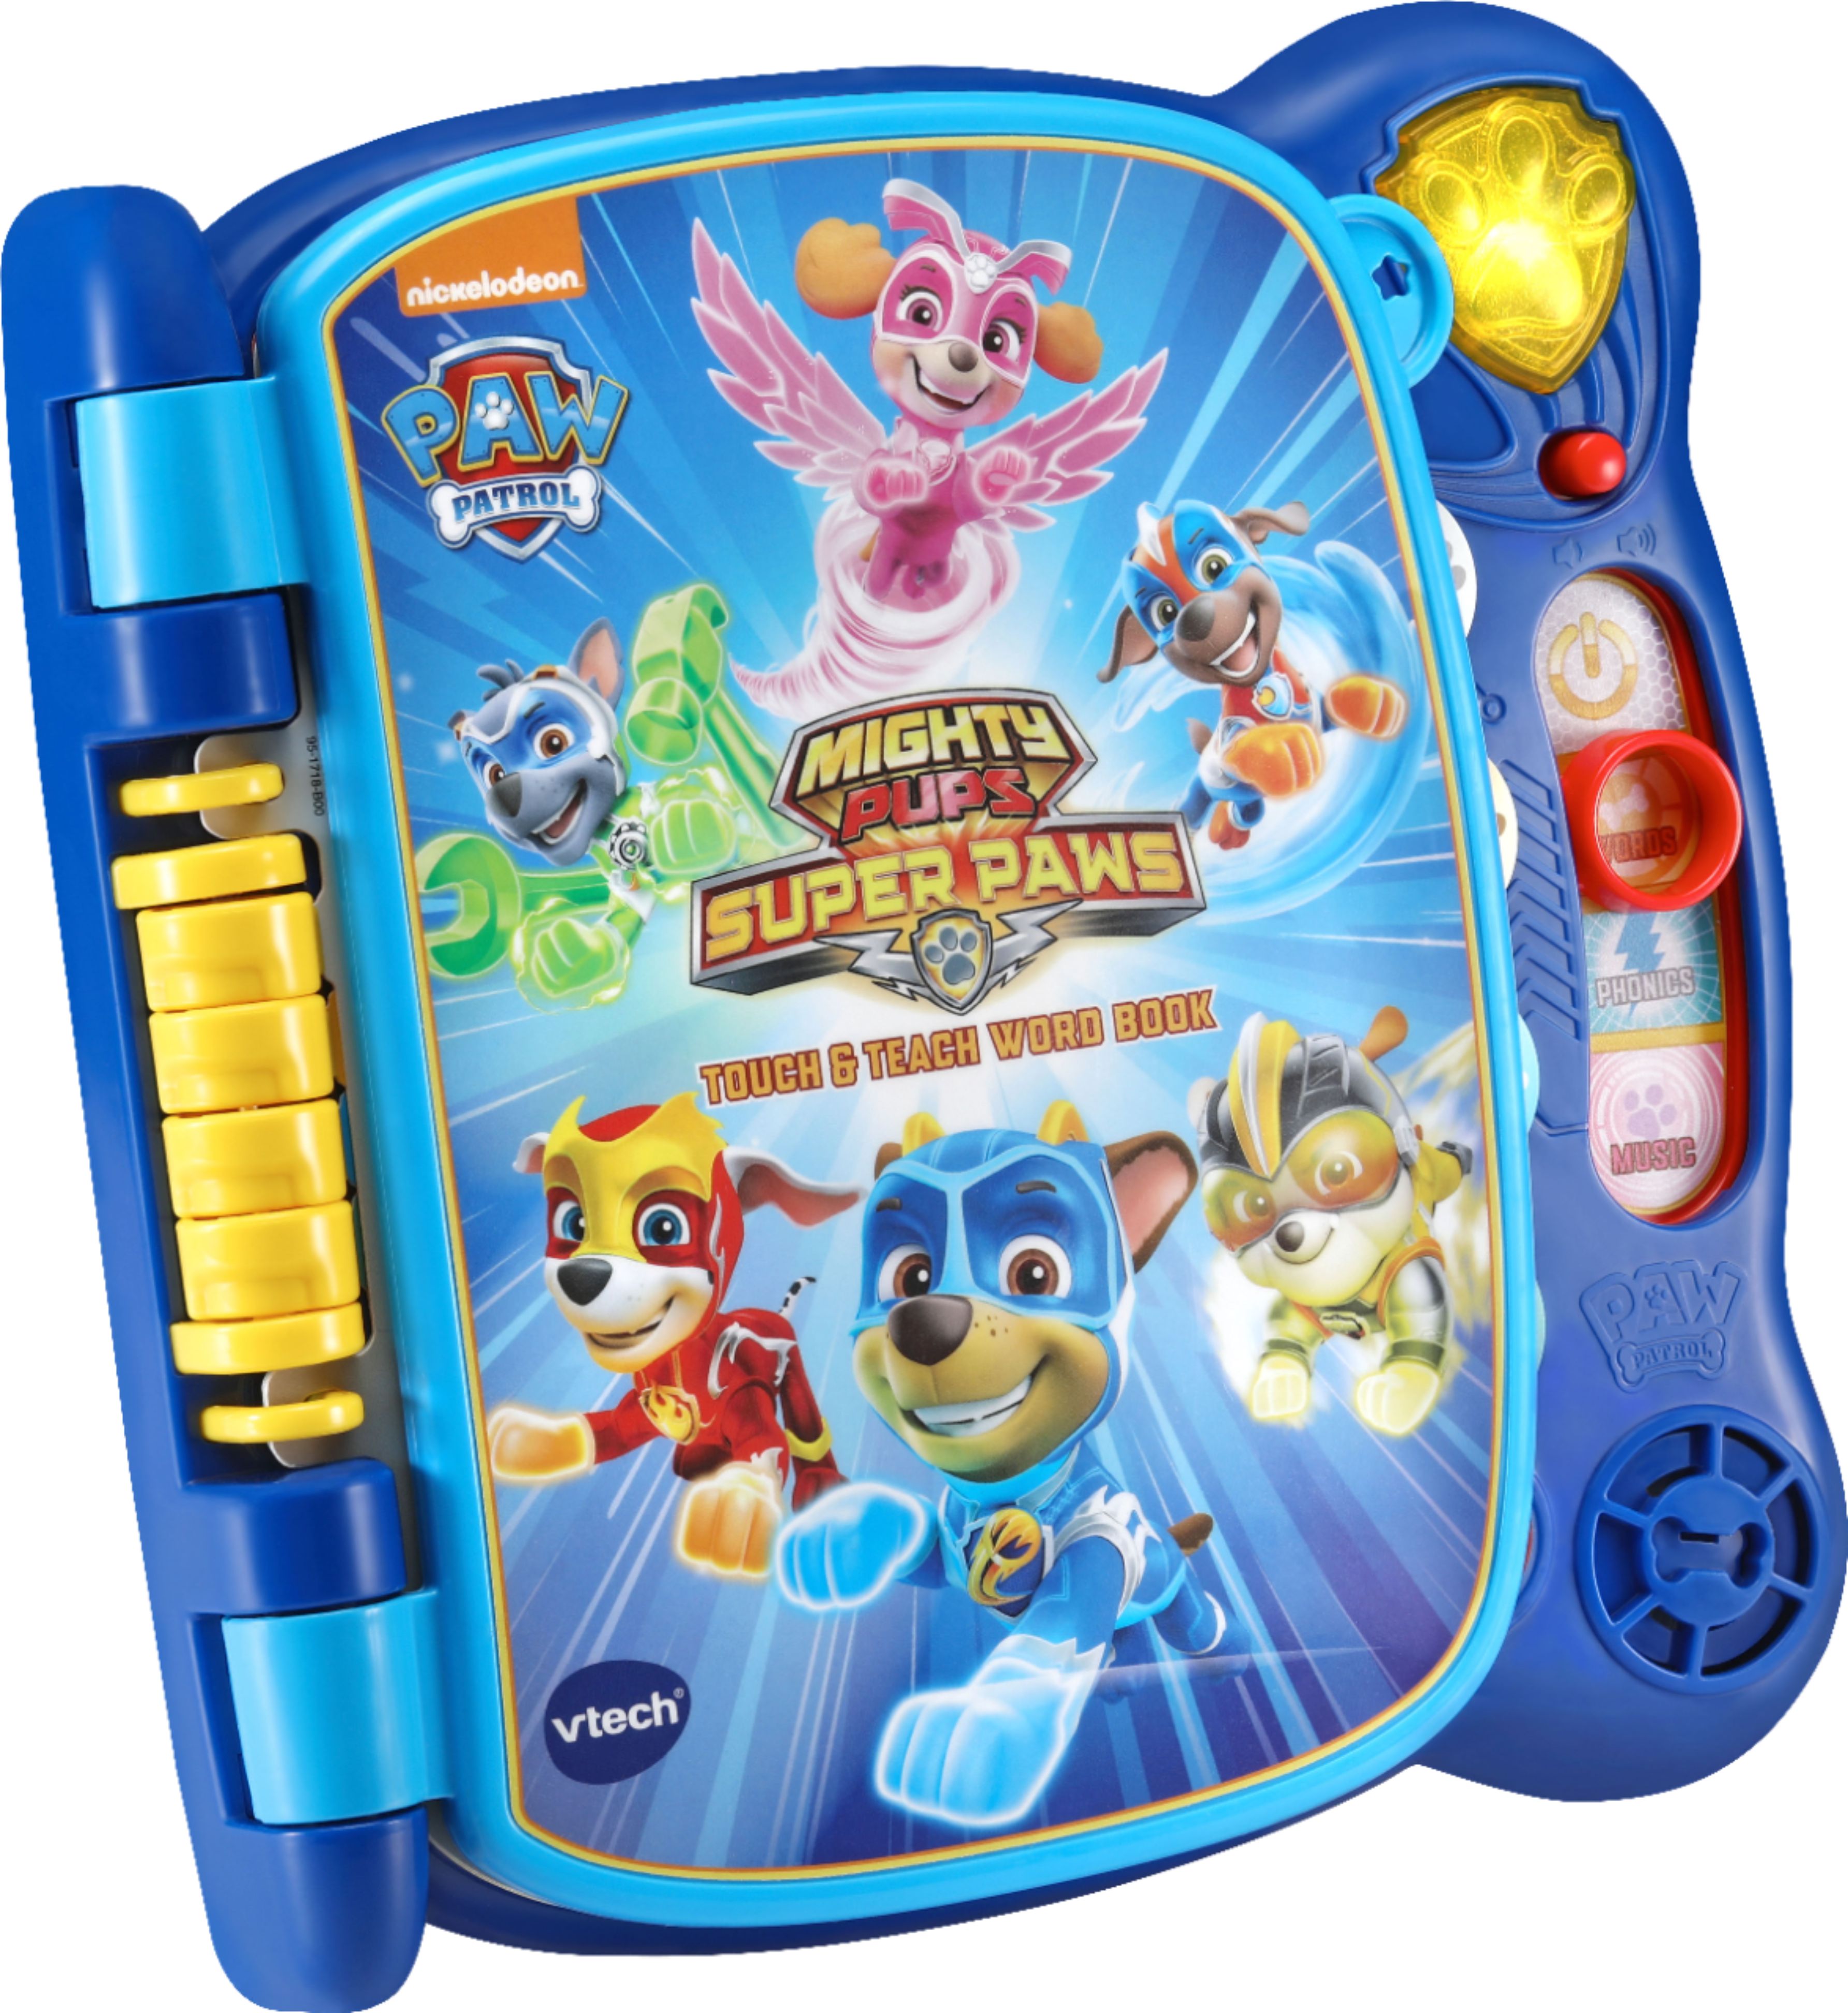 Best Buy: VTech PAW Patrol Mighty Pups Touch & Teach Word Book